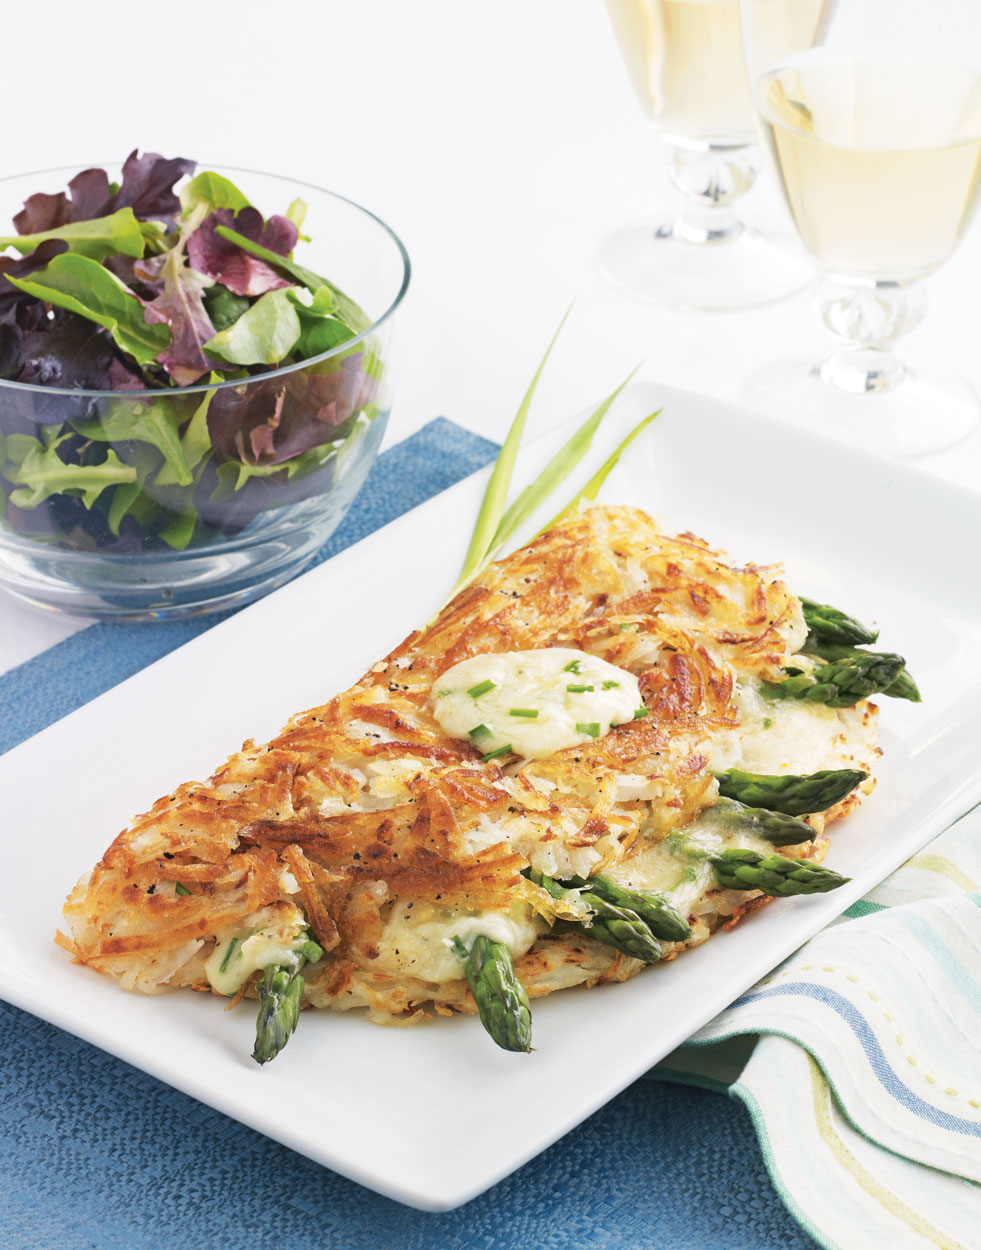 Hash Brown "Omelet" with Asparagus & Brie